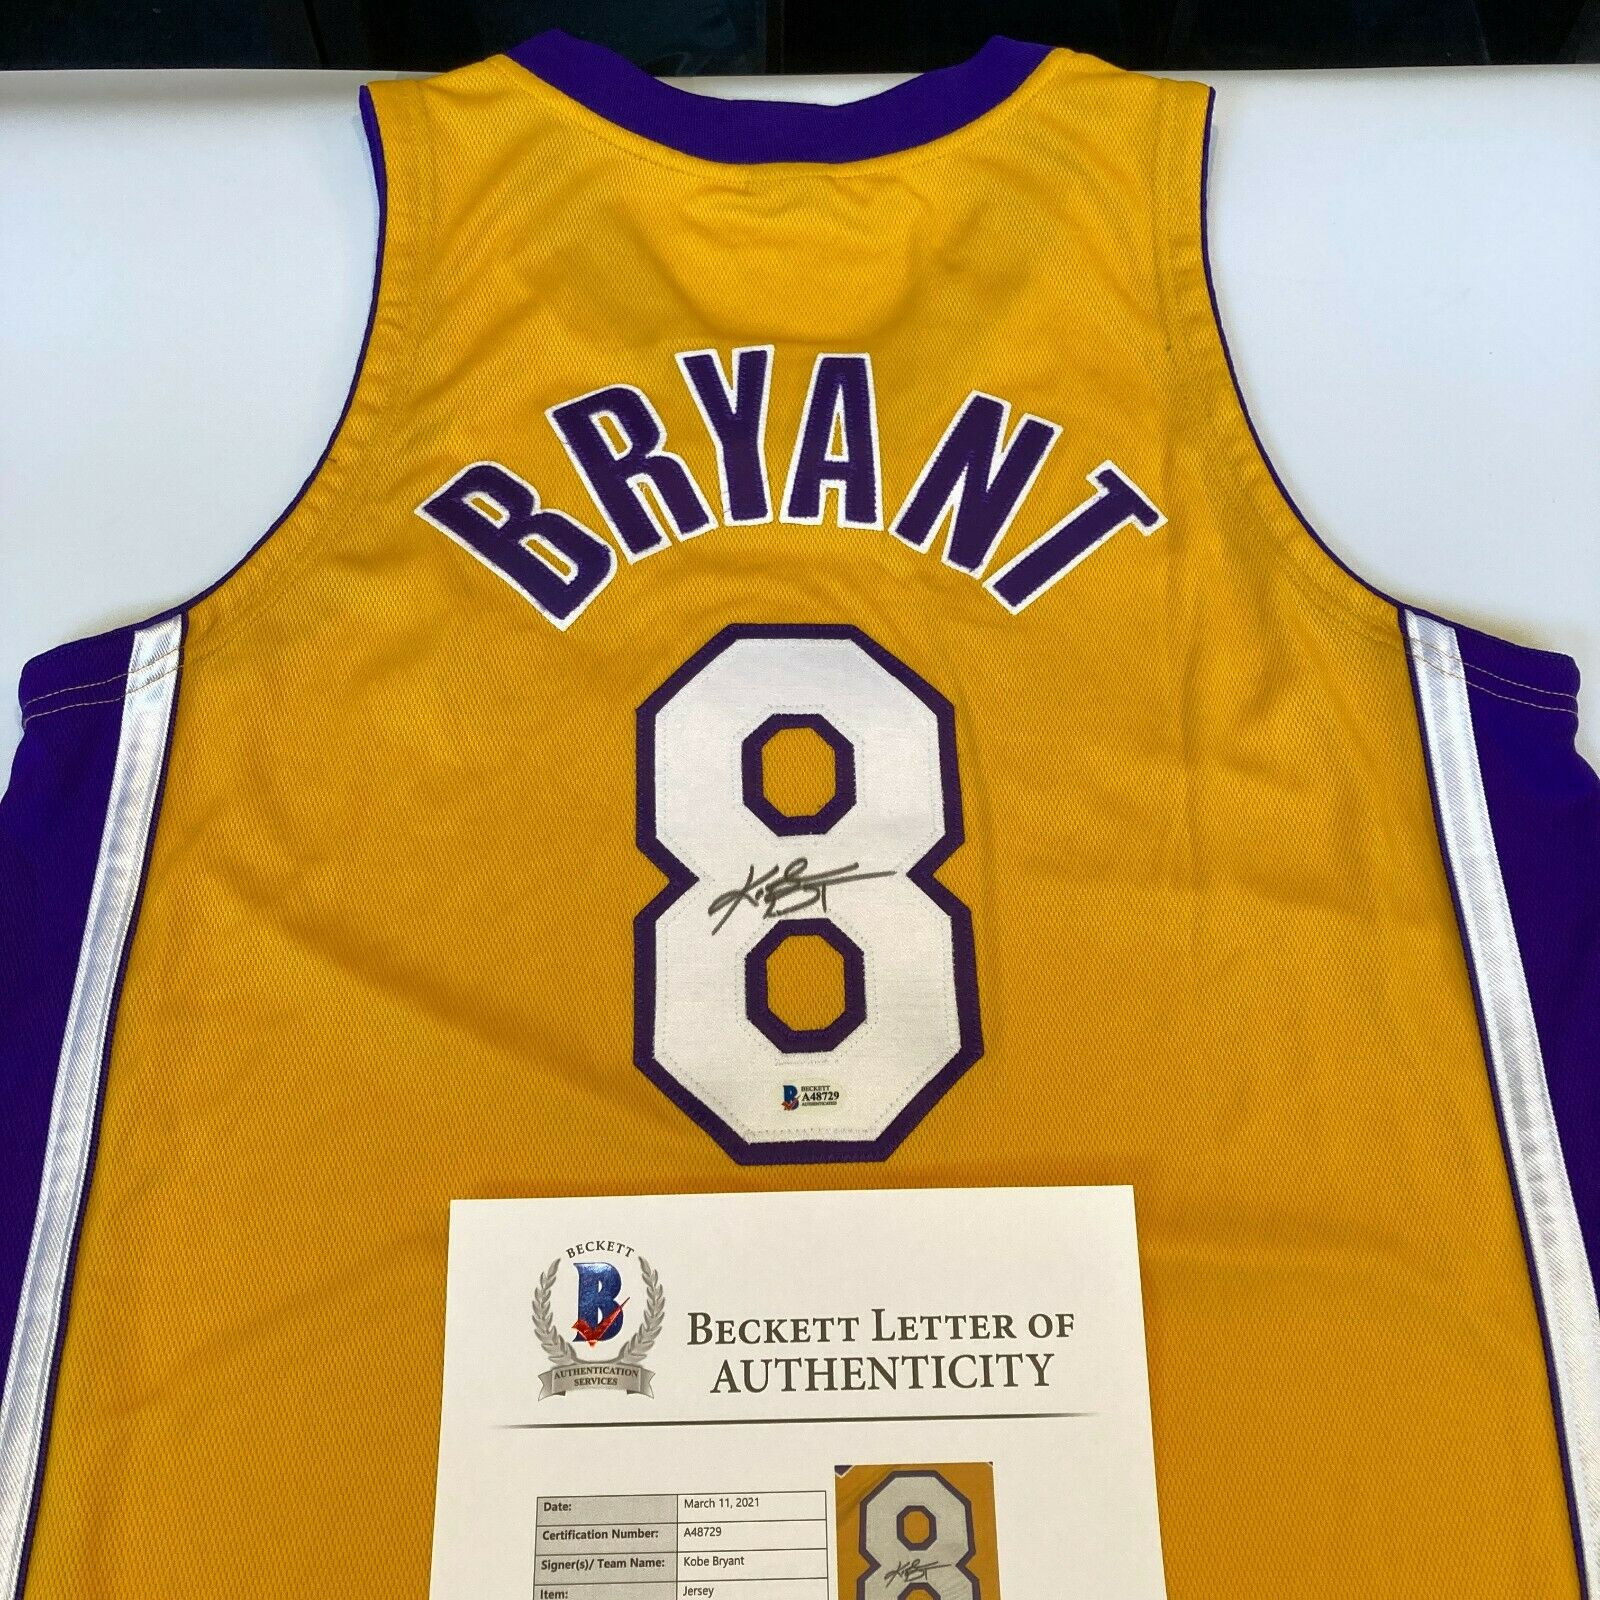 Kobe Bryant Los Angeles Lakers Signed Autographed Yellow #8 Jersey